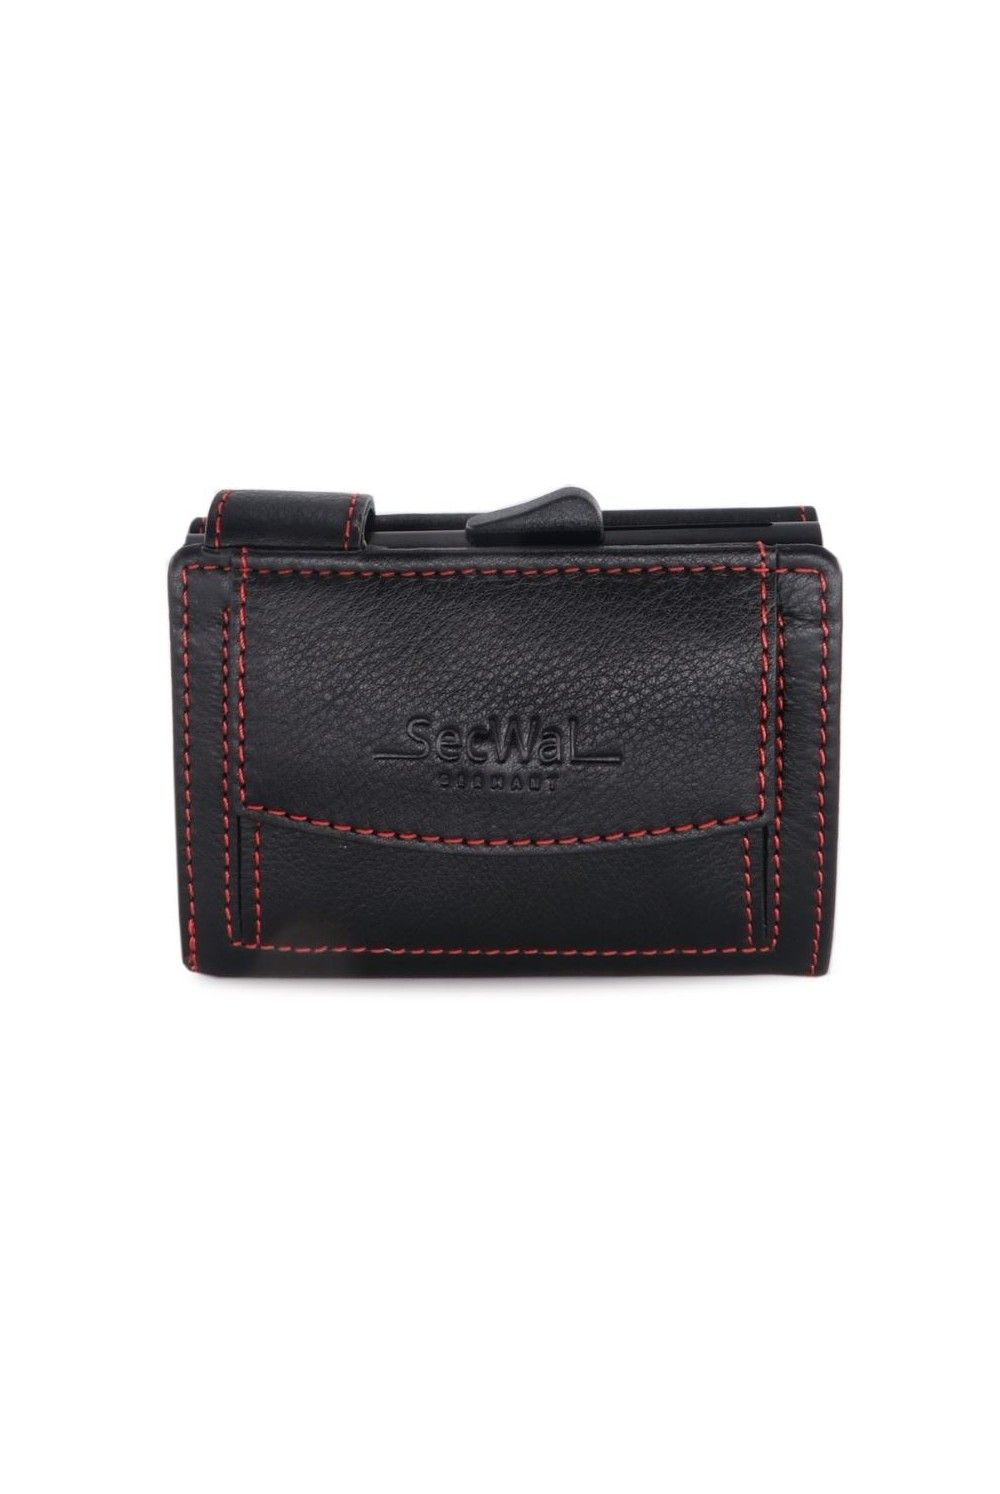 SecWal Card Case DK Leather black-red